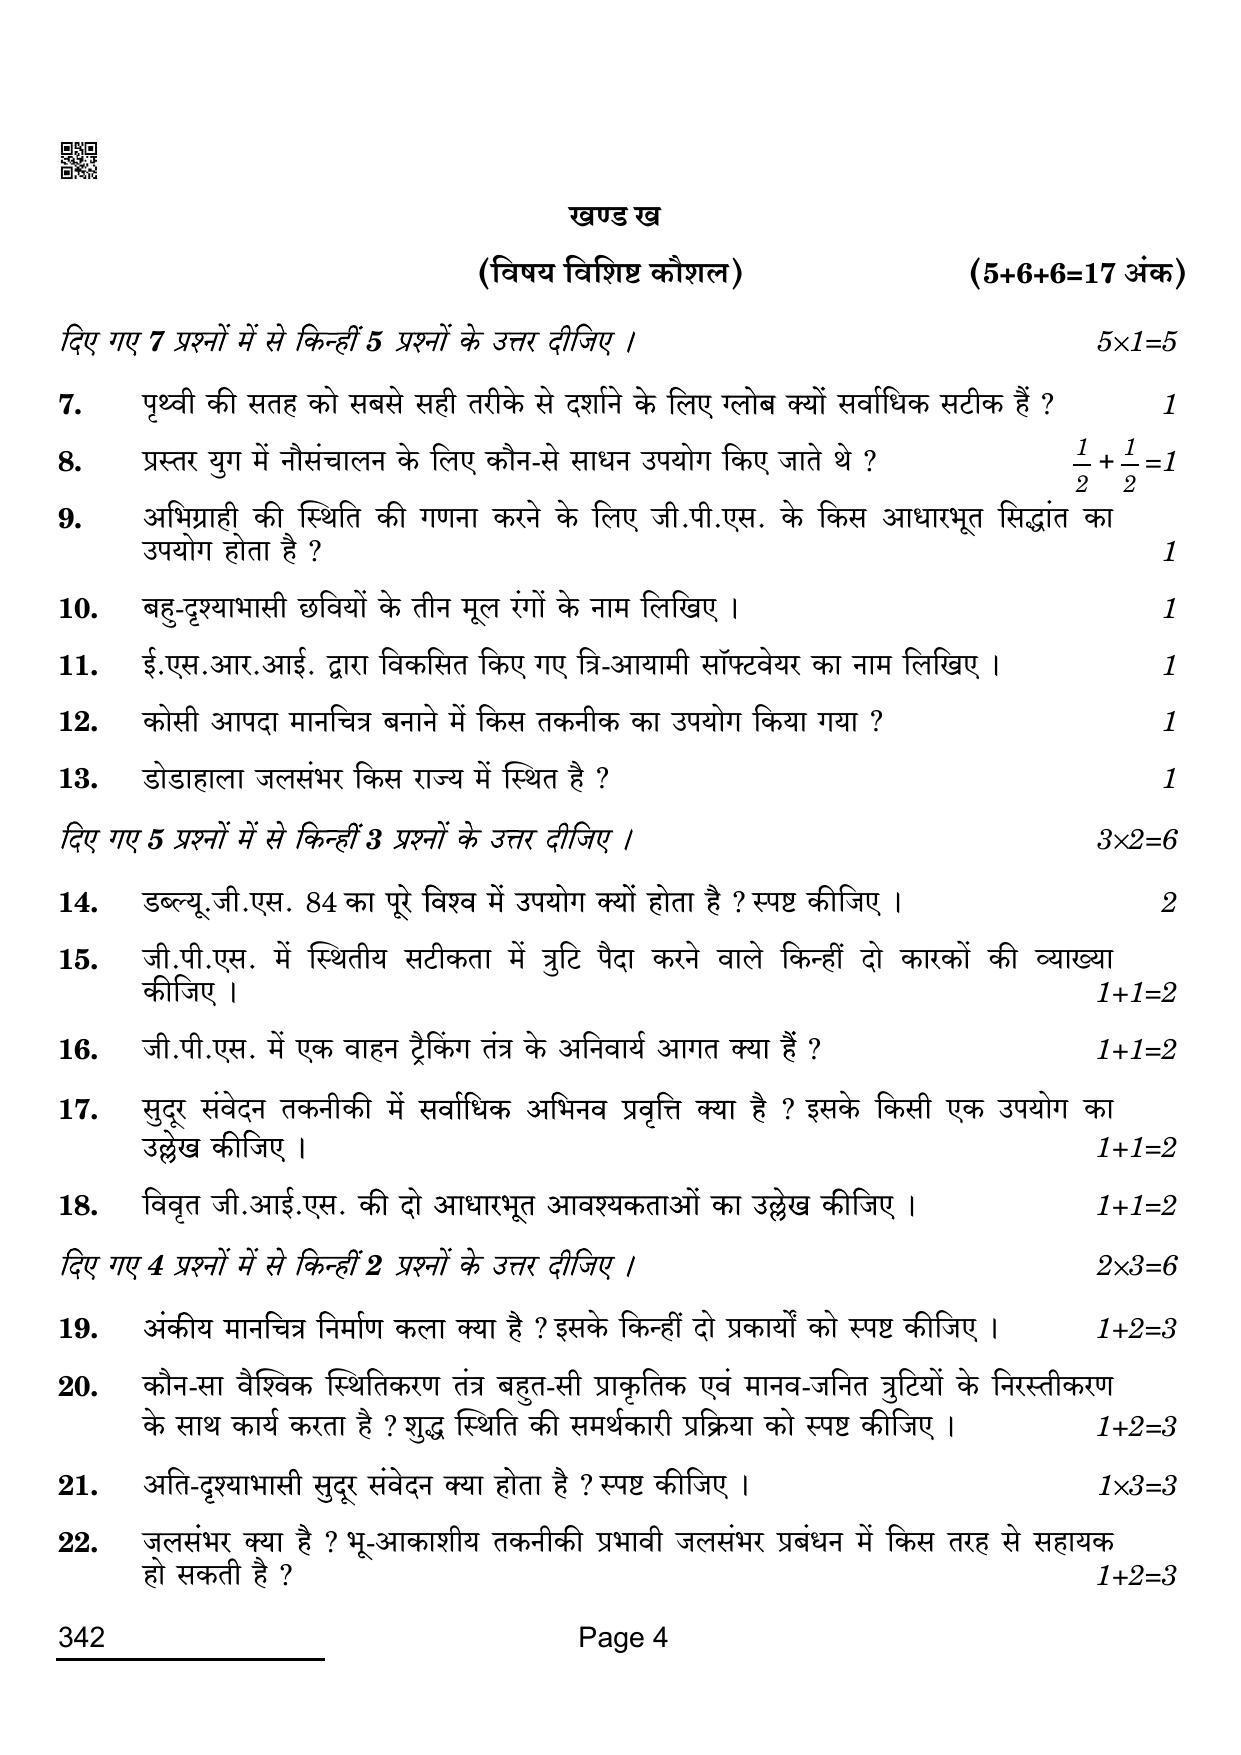 CBSE Class 12 342_Geospatial Technology 2022 Question Paper - Page 4